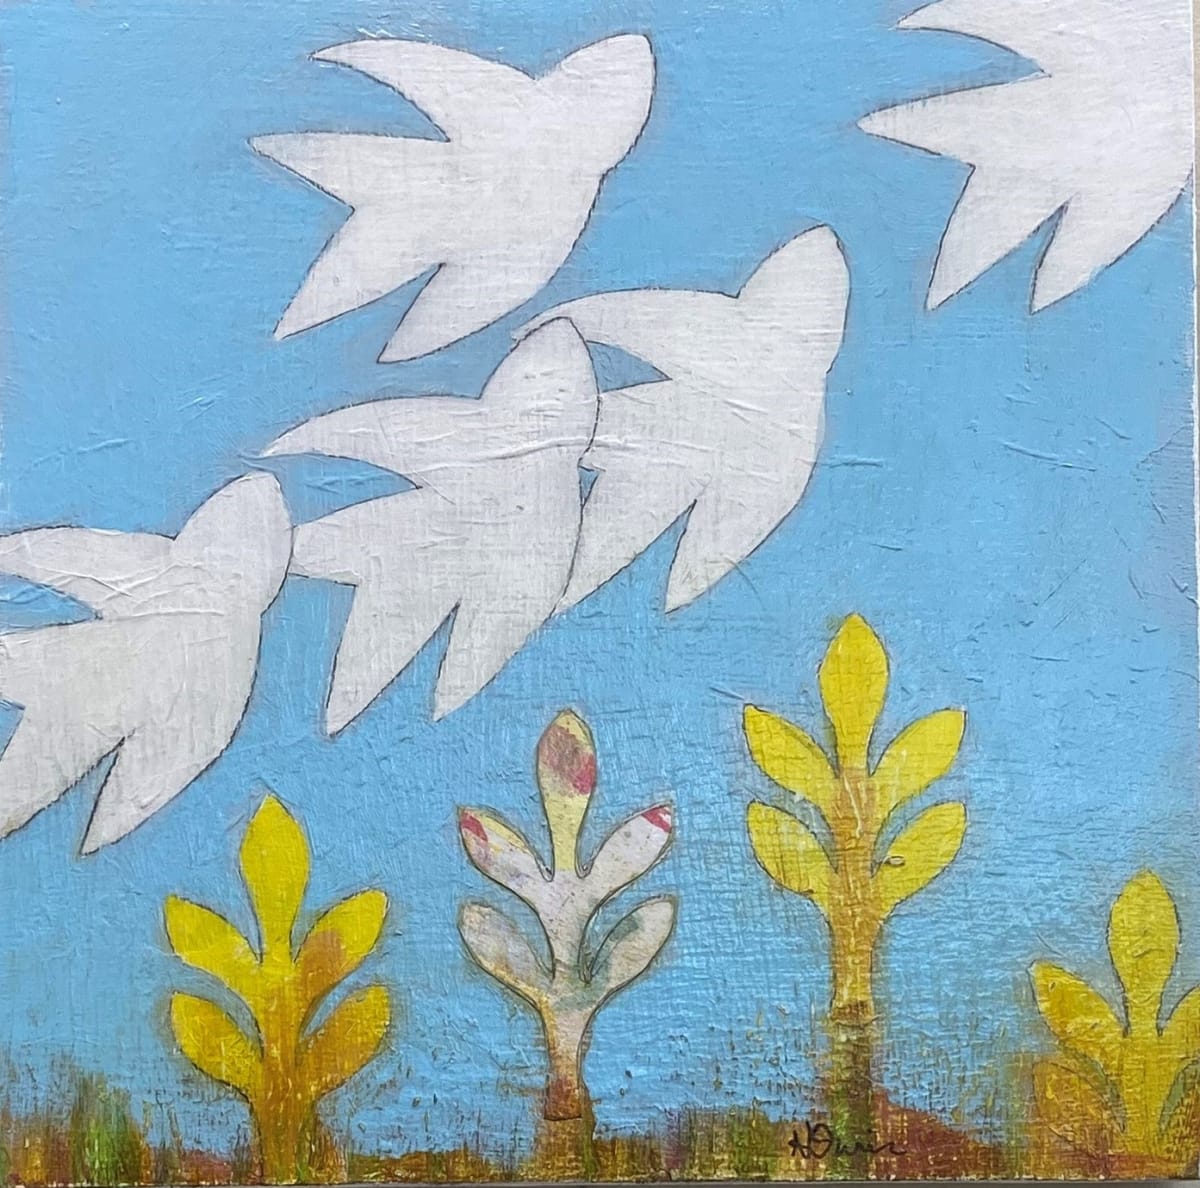 Doves in Flight #3 by Heather Duris  Image: Part of the Doves of Peace series done in support of Ukraine